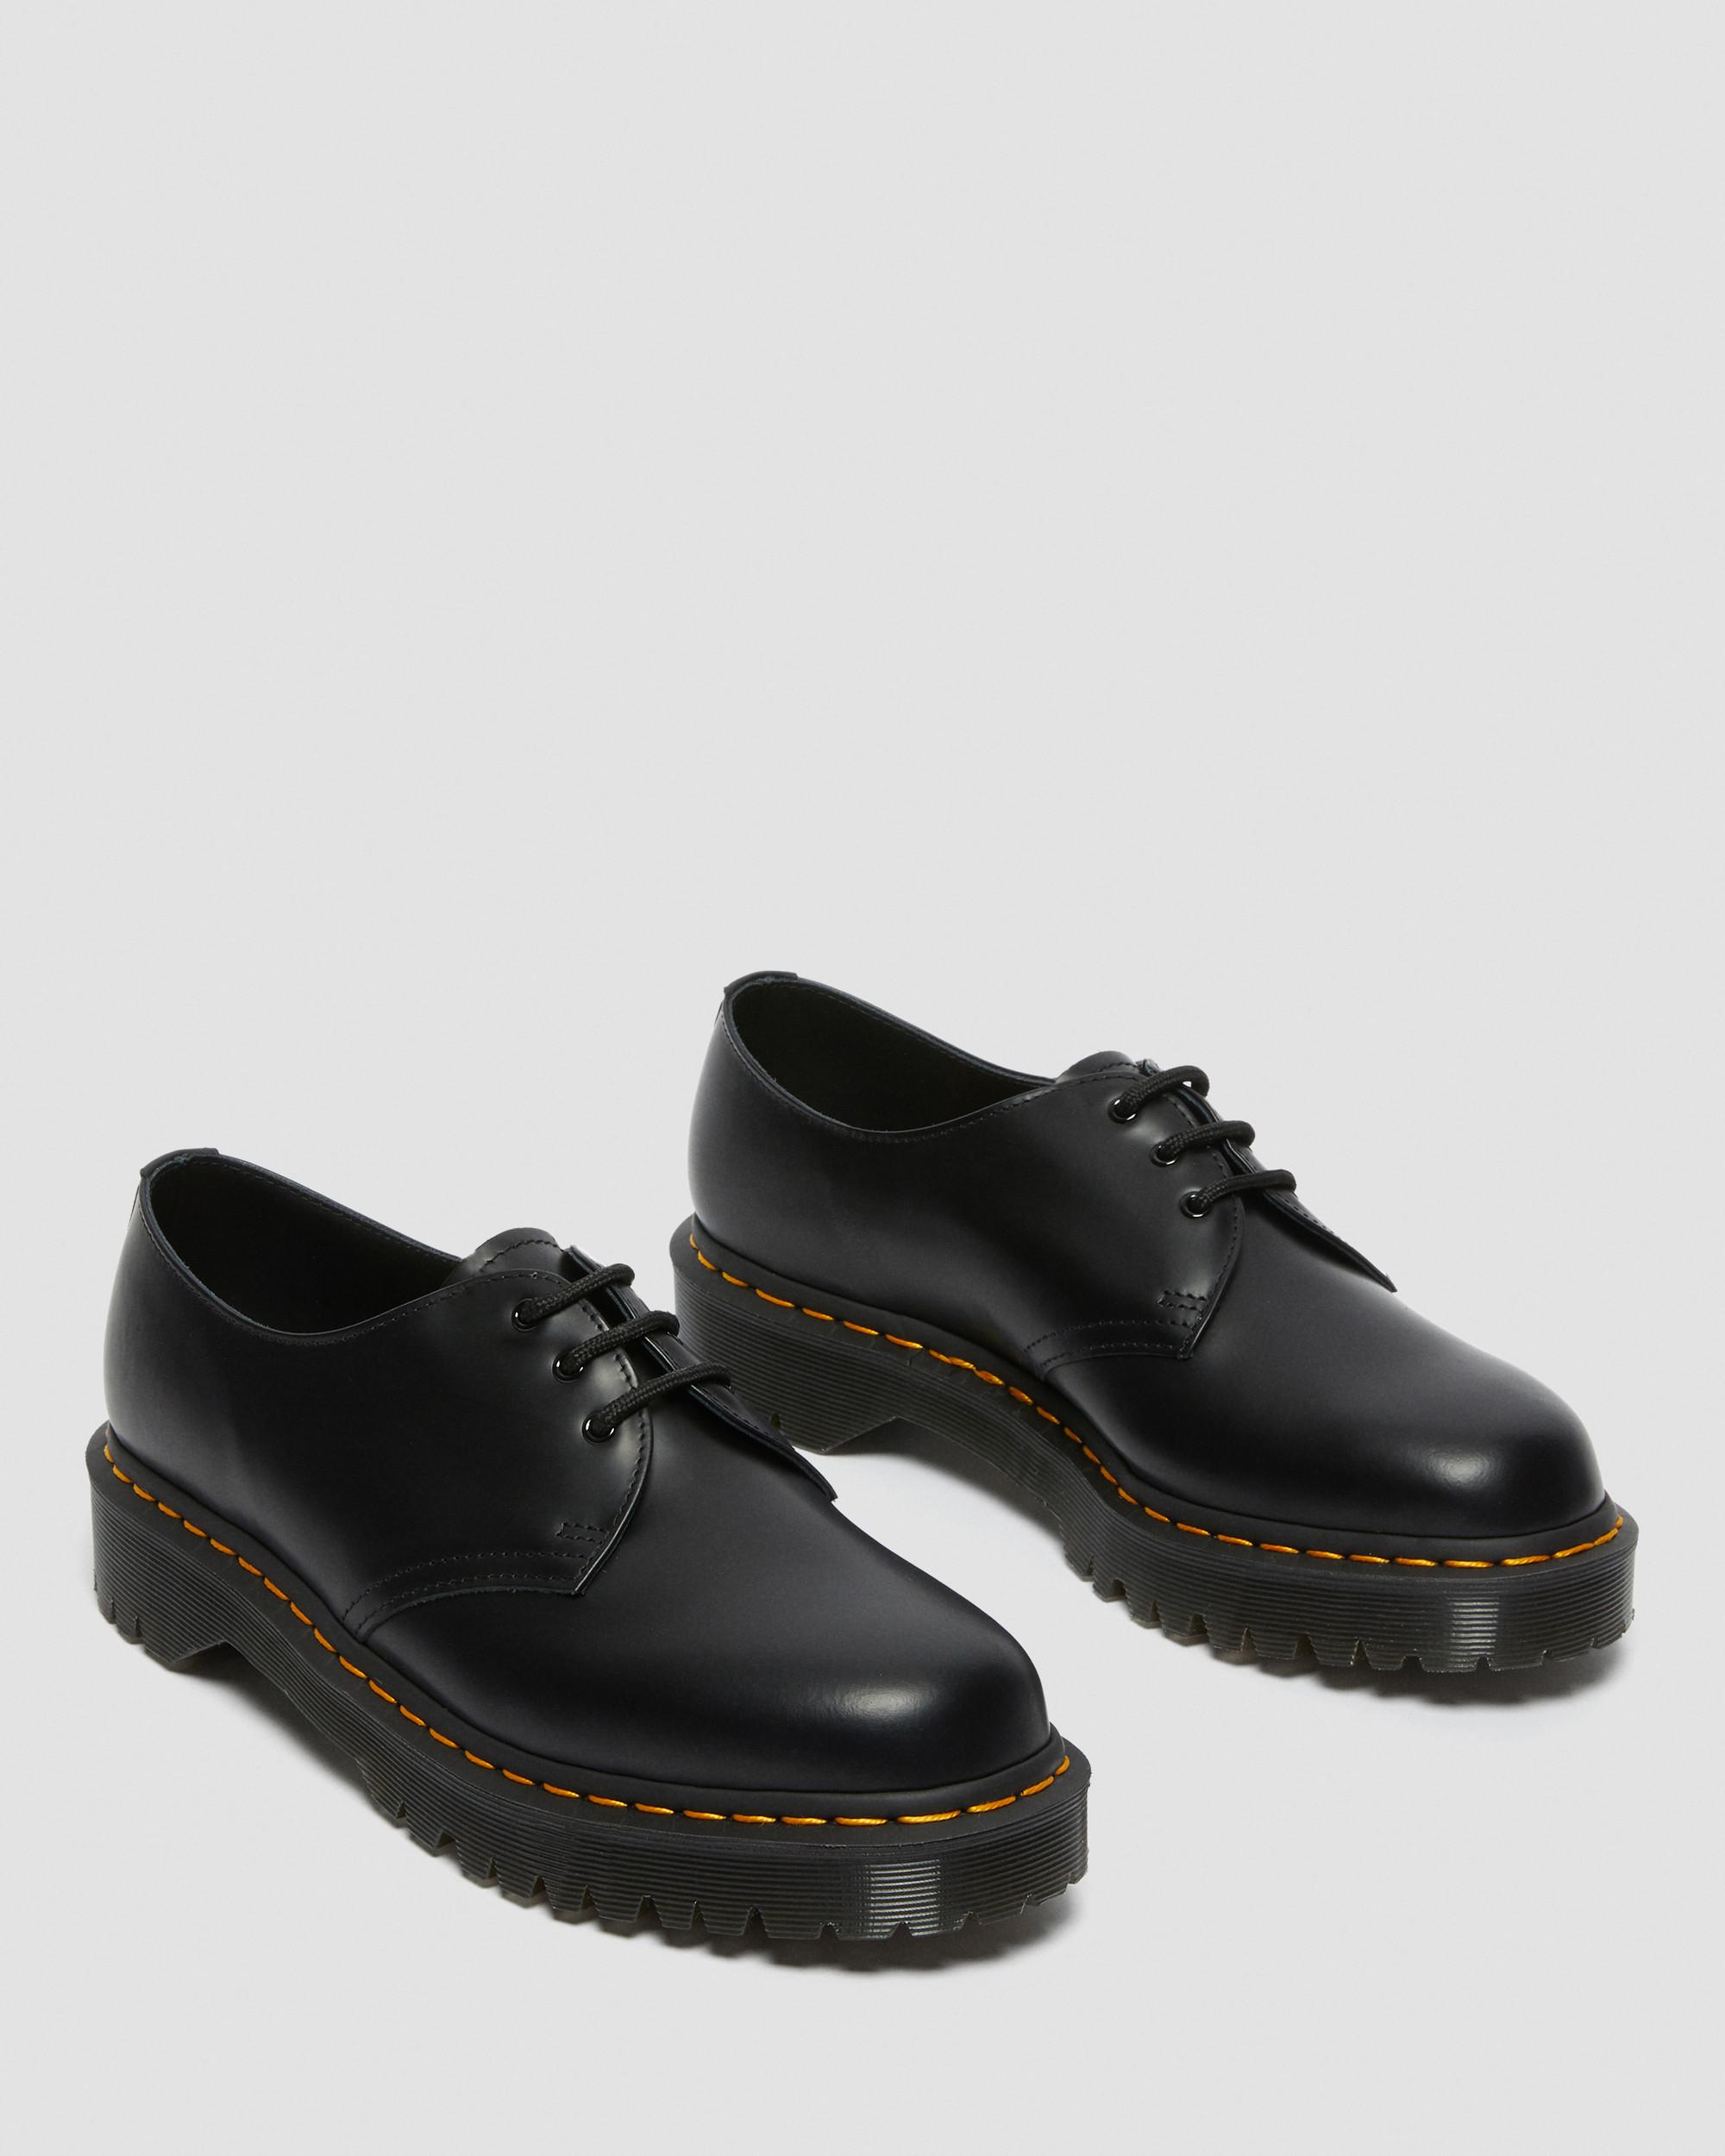 Black 1461 BEX SMOOTH LEATHER OXFORD SHOES